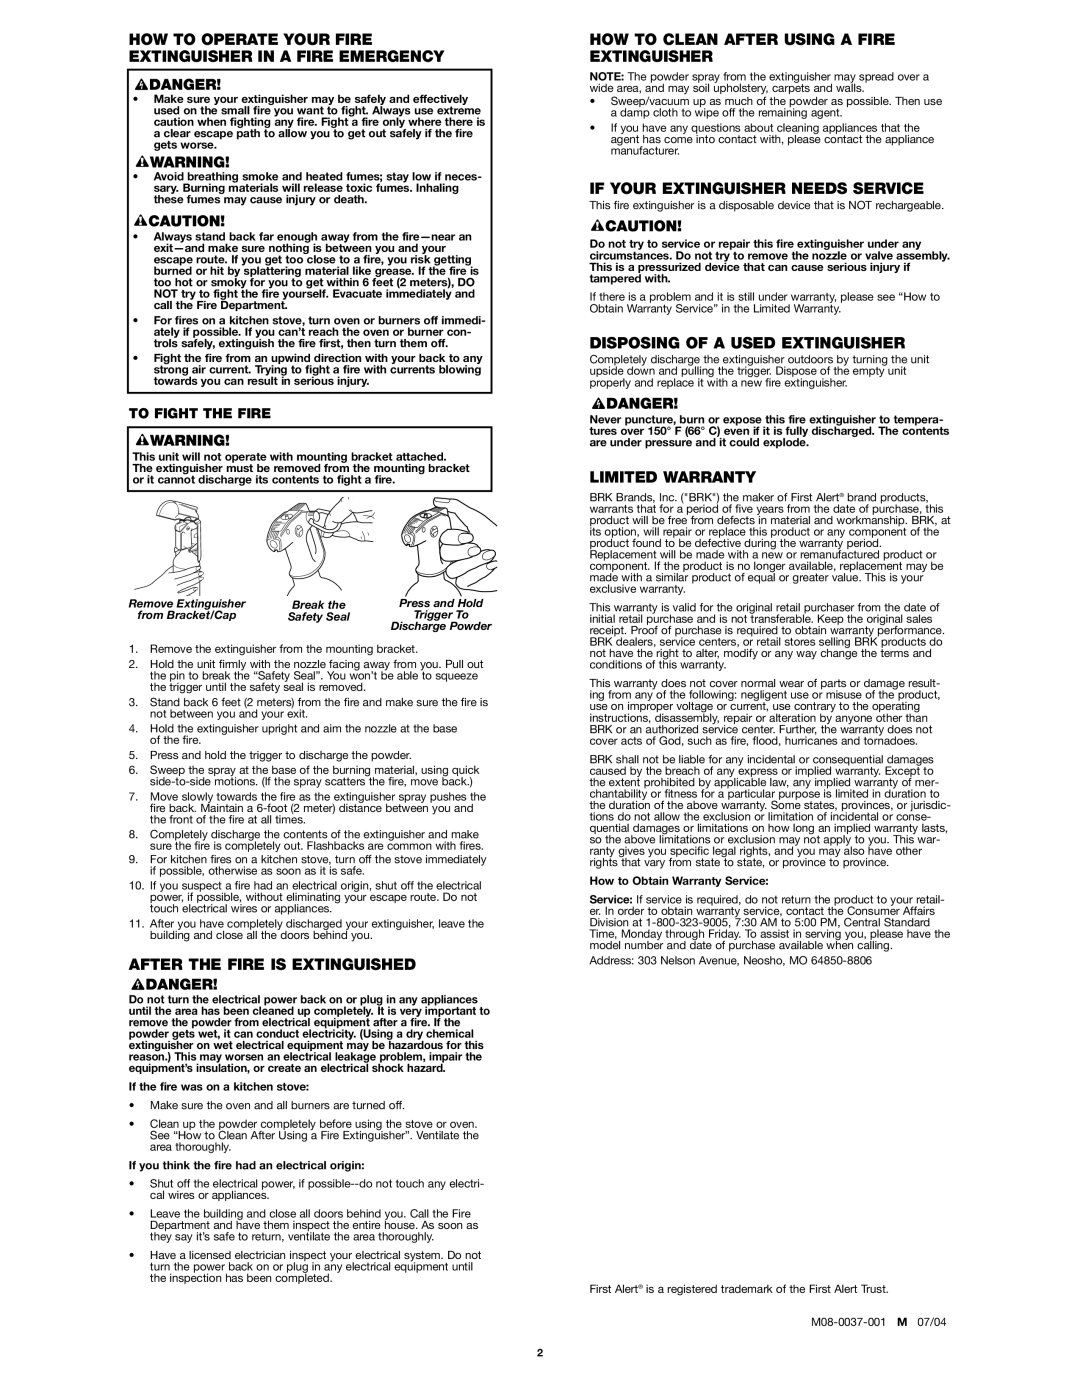 First Alert KFE2S5 user manual How To Operate Your Fire Extinguisher In A Fire Emergency, After The Fire Is Extinguished 